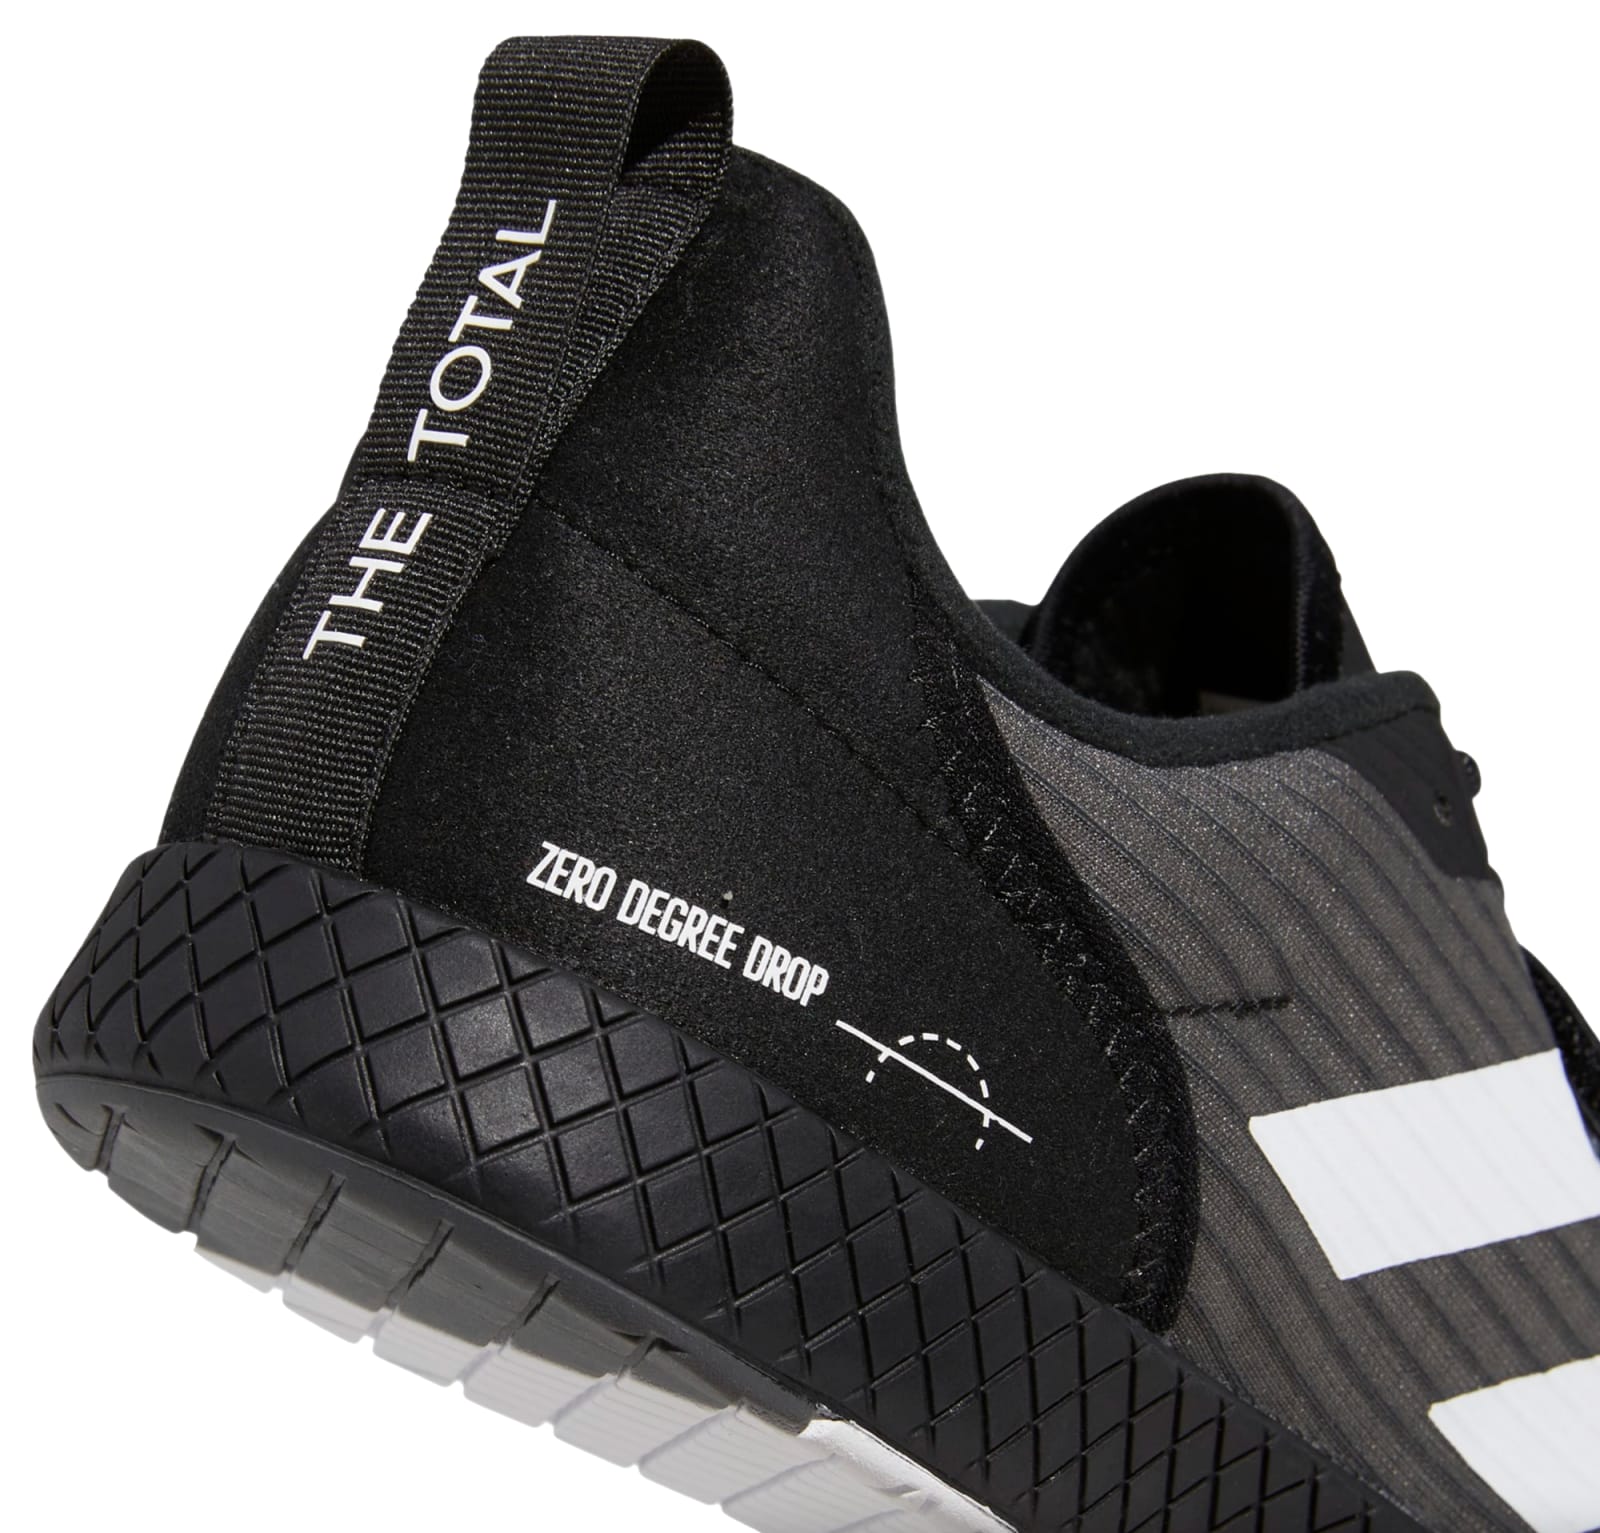 Adidas The Total Shoes - Core Black / Cloud White / Gray Six | Fitness